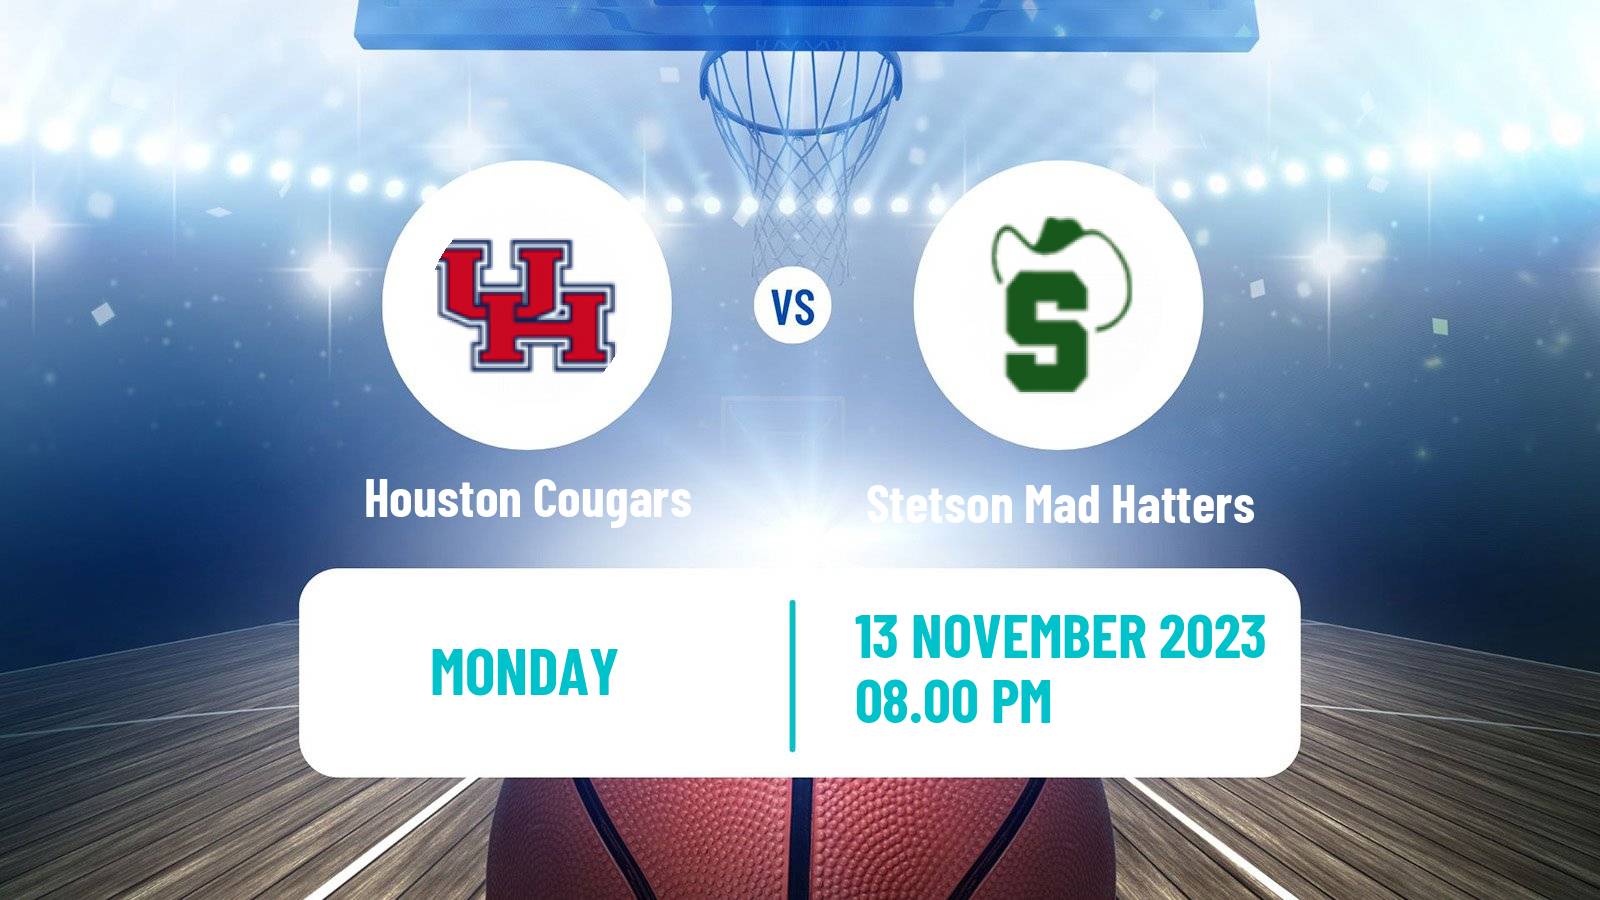 Basketball NCAA College Basketball Houston Cougars - Stetson Mad Hatters